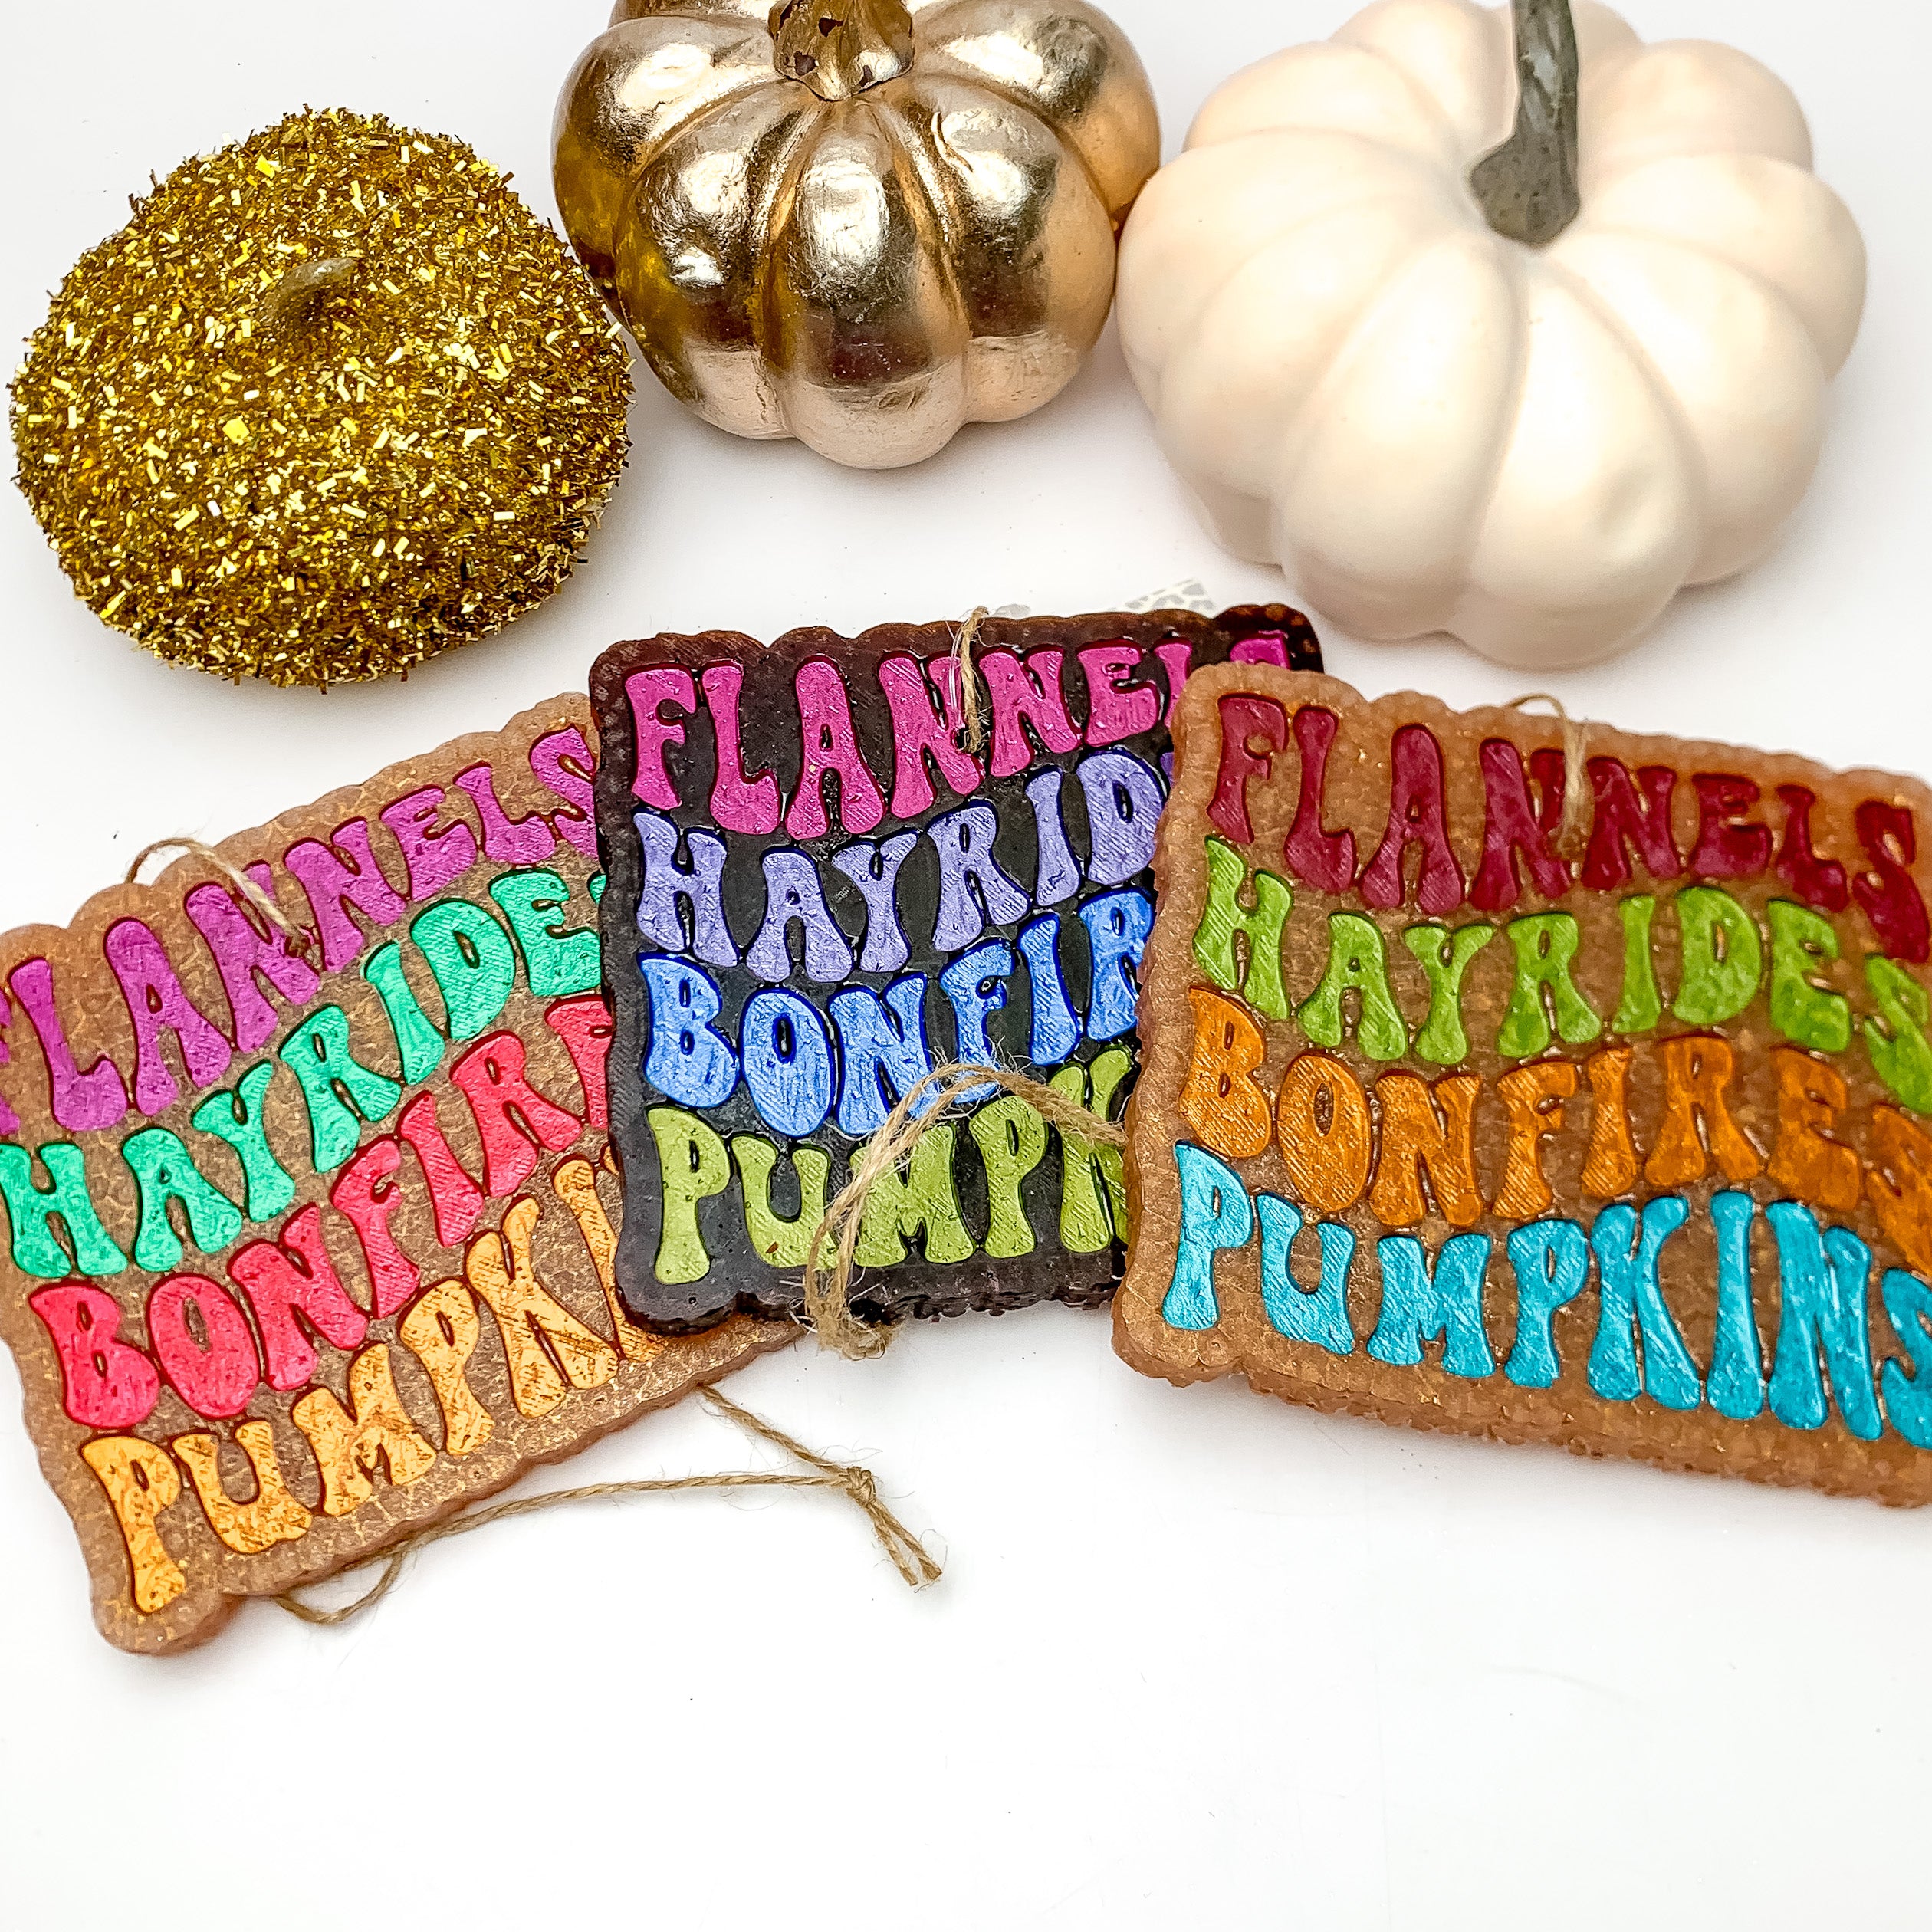 "Flannels Hayrides Bonfires Pumpkins" Freshie in Vanilla Pumpkin Marshmallow. These freshies are pictured on a white background with pumpkins above them.